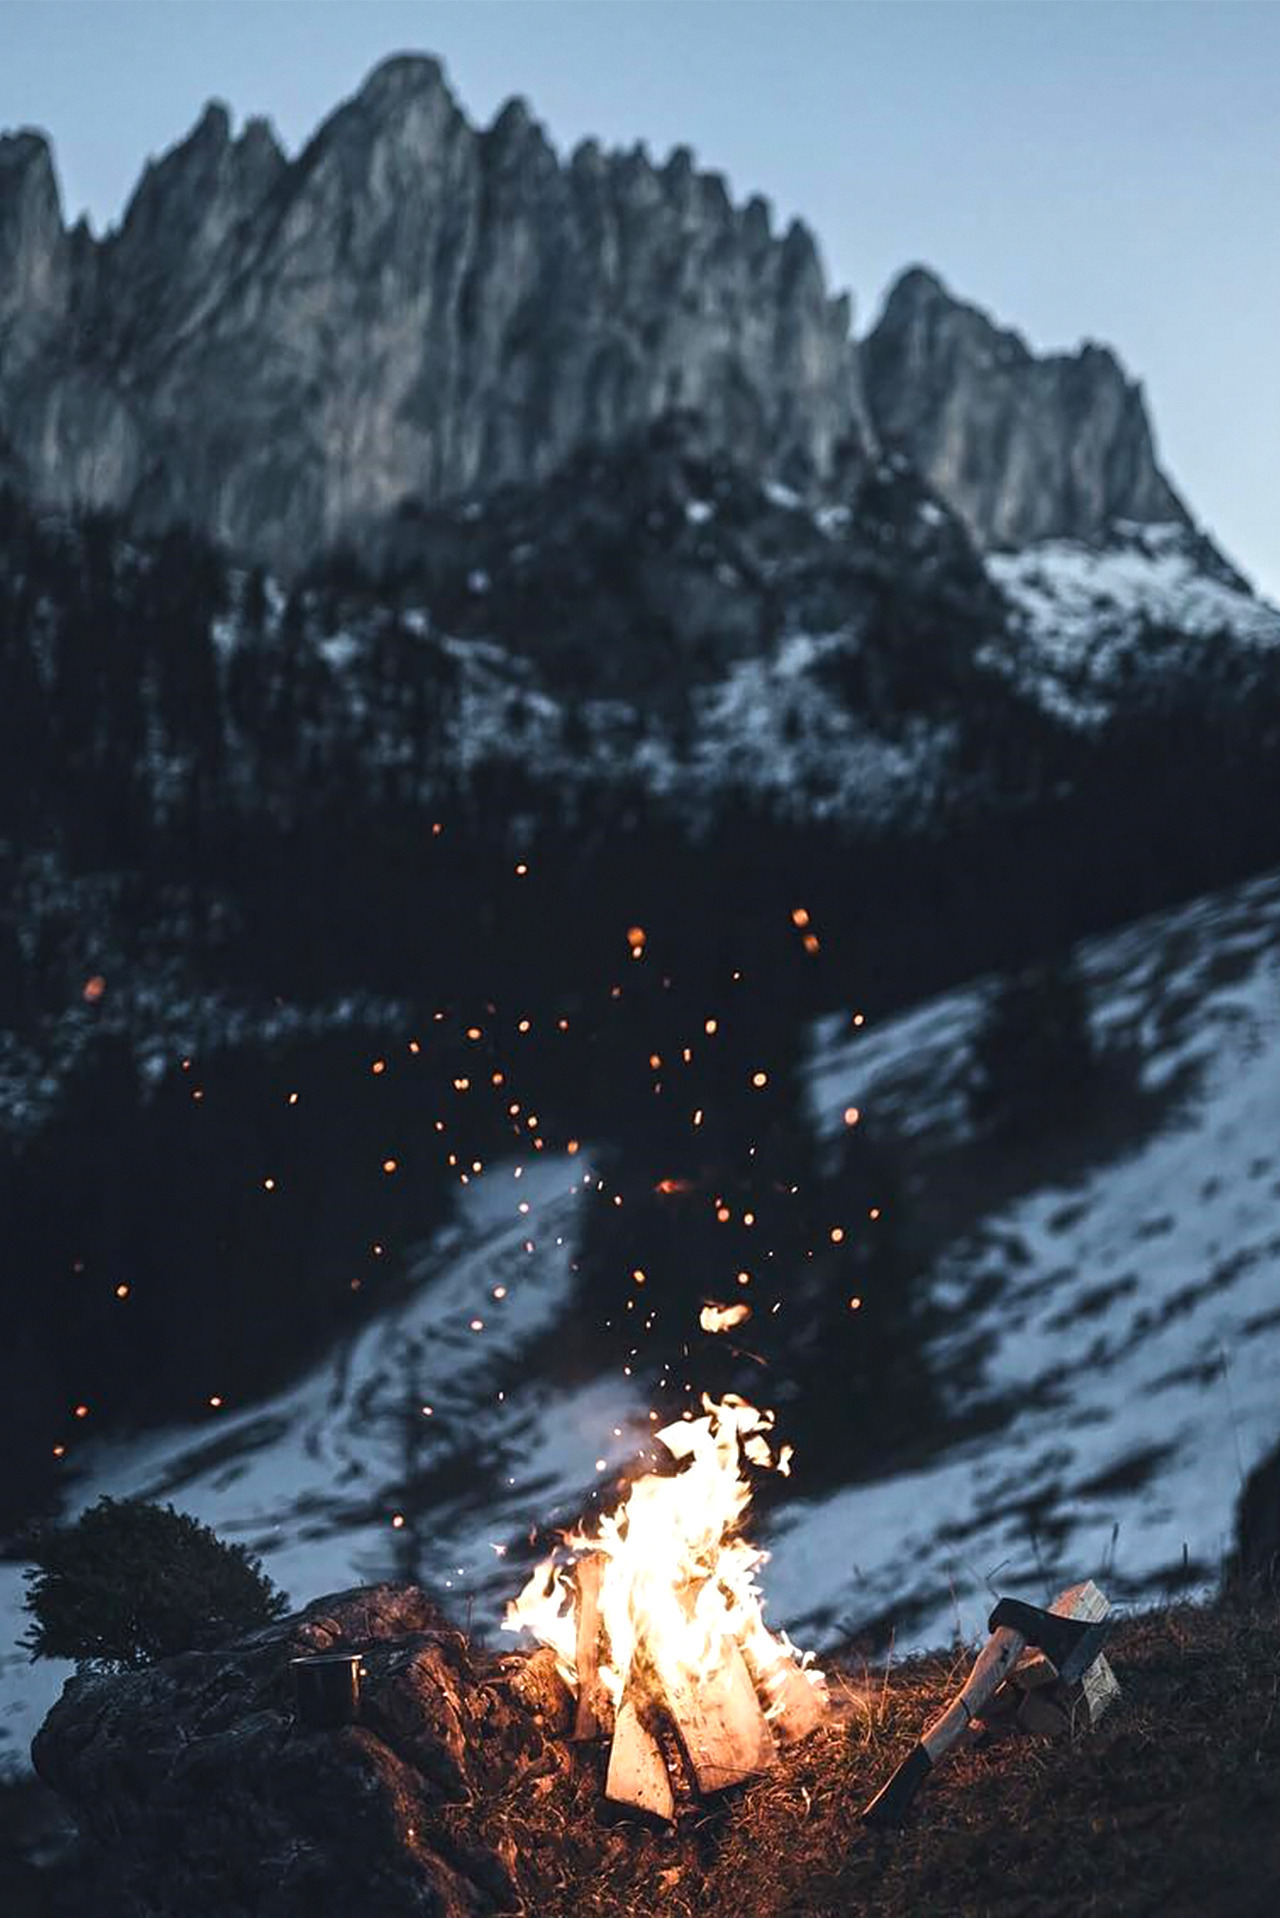 mountain snow scene with campfire